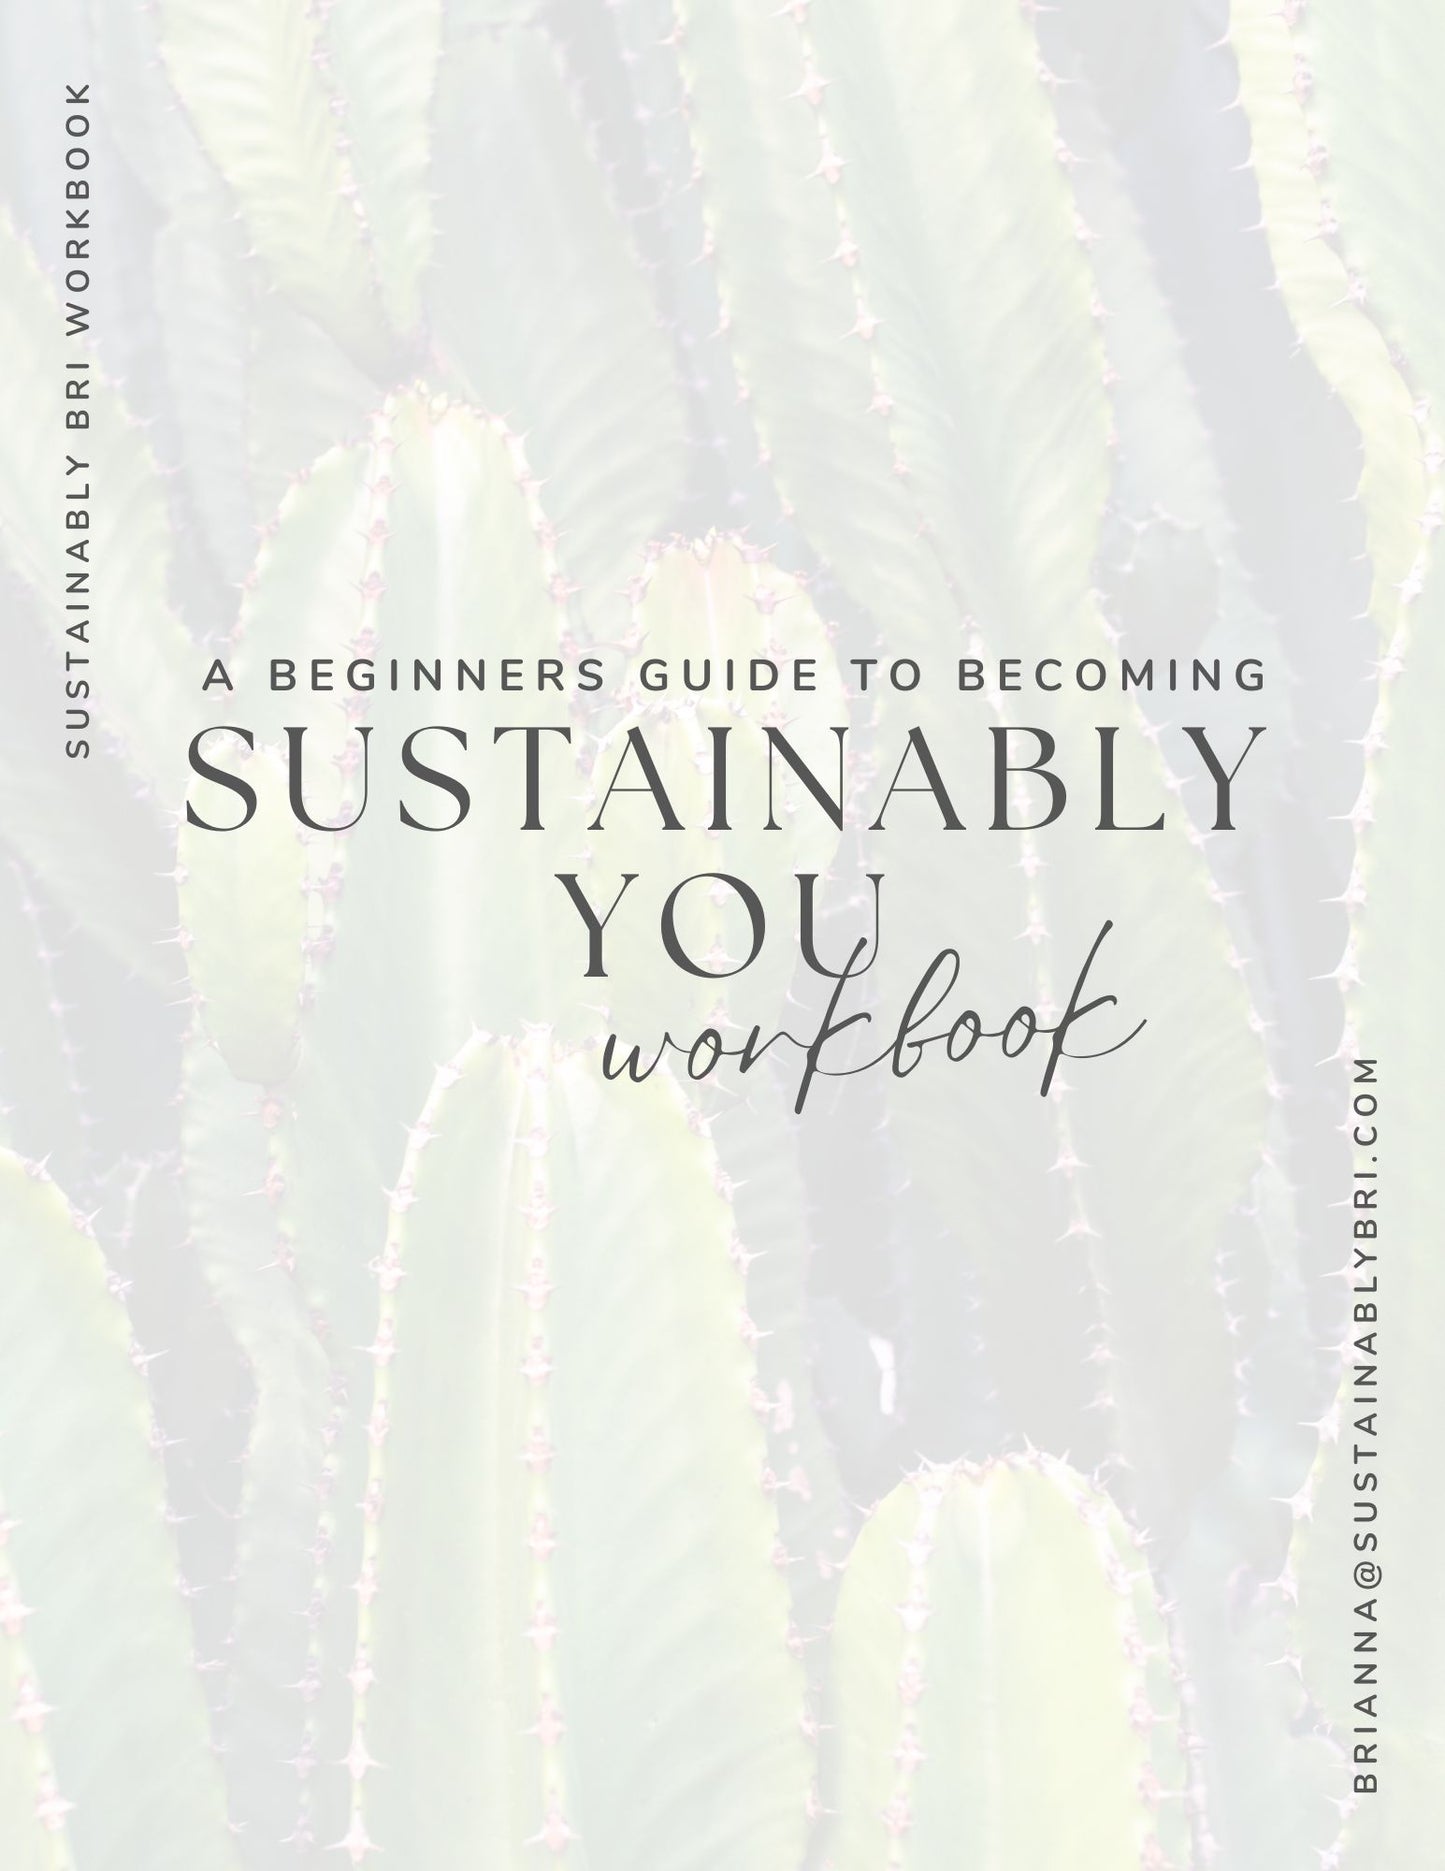 A Beginners Guide To Becoming Sustainably You - Workbook